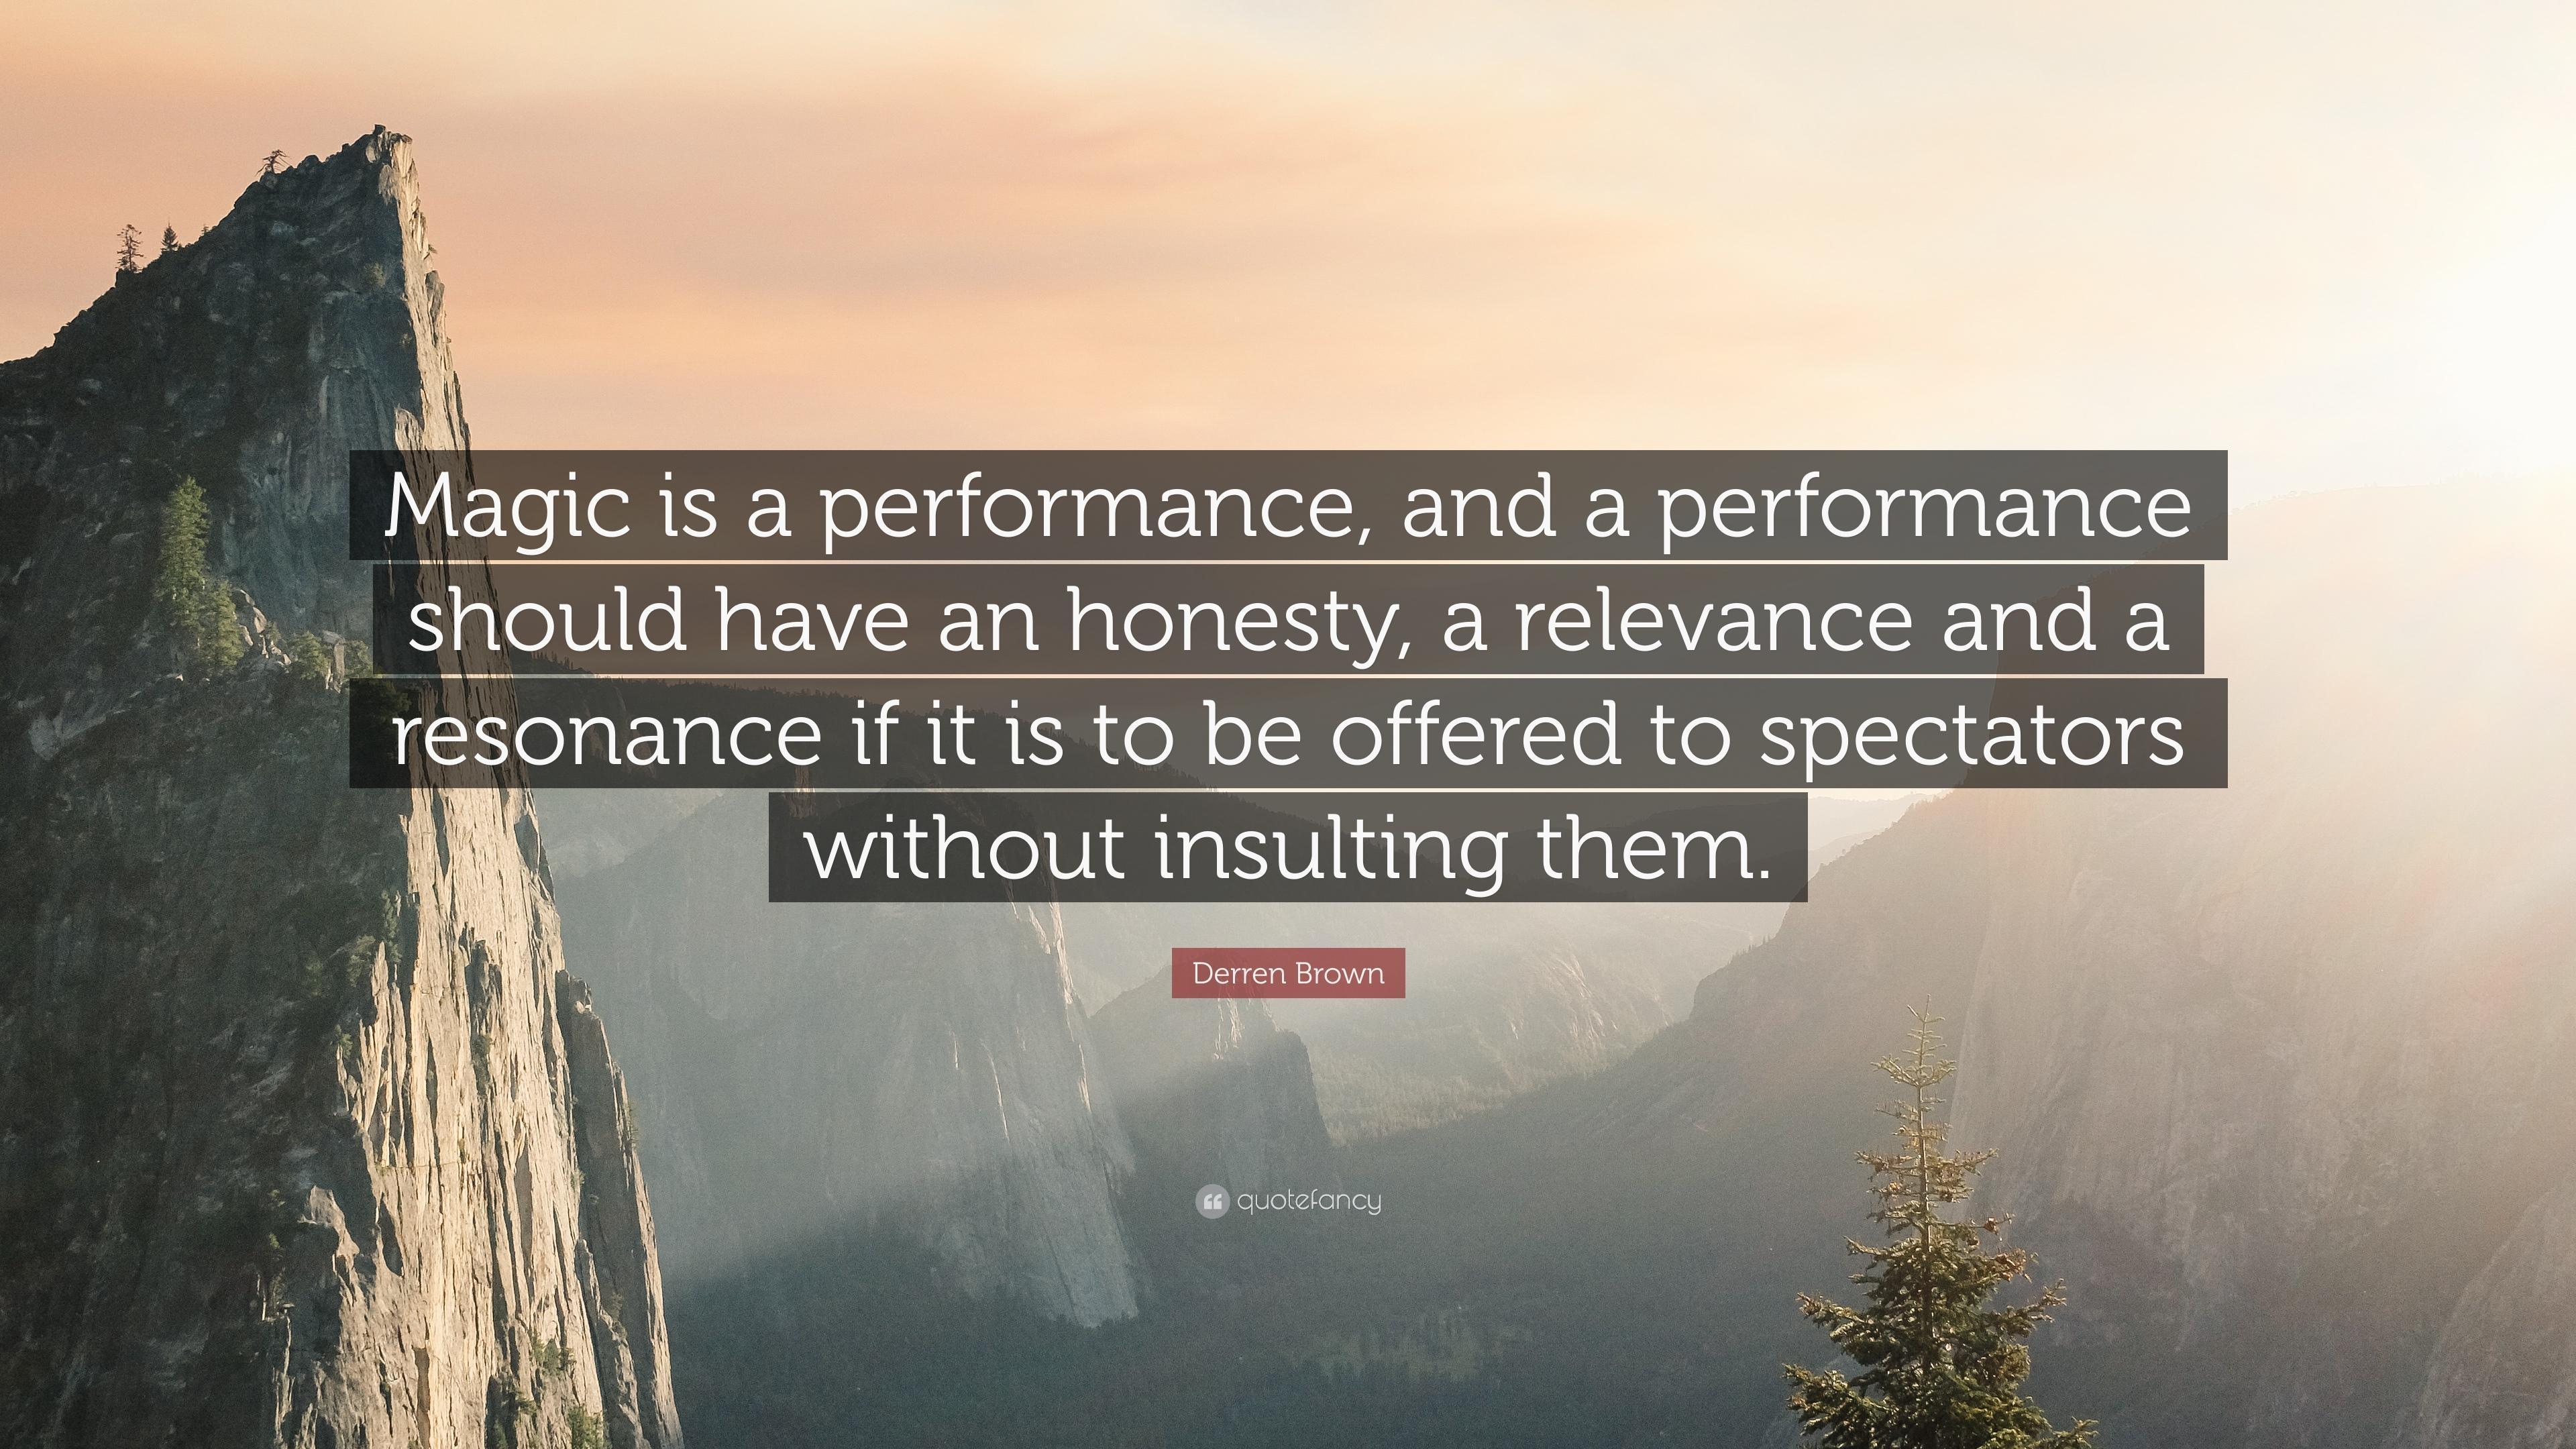 Derren Brown Quote: “Magic is a performance, and a performance